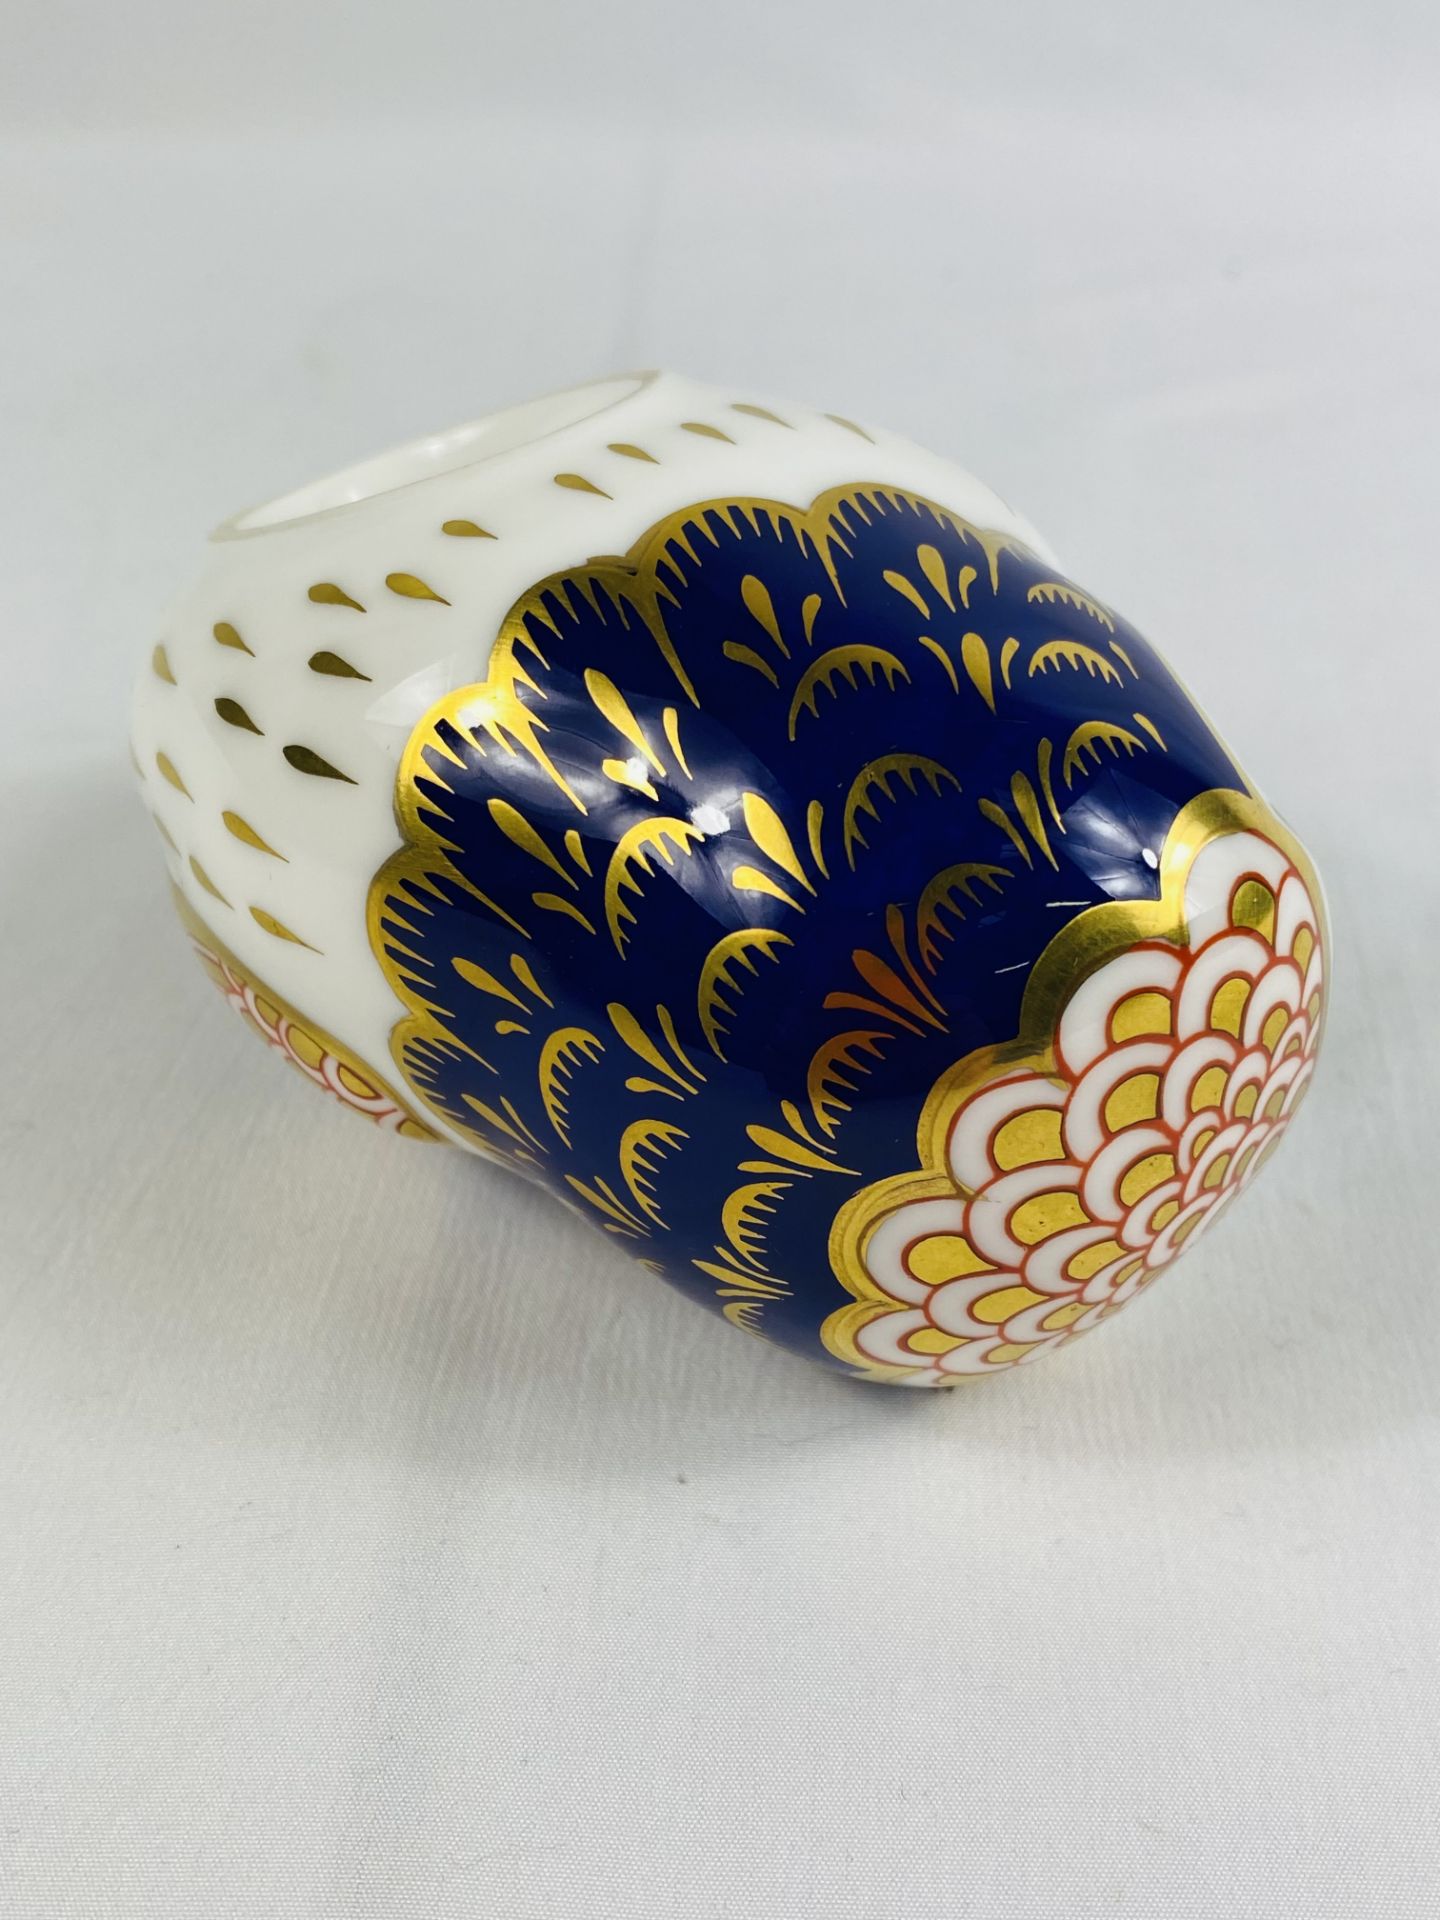 Royal Crown Derby owl paperweight - Image 5 of 6